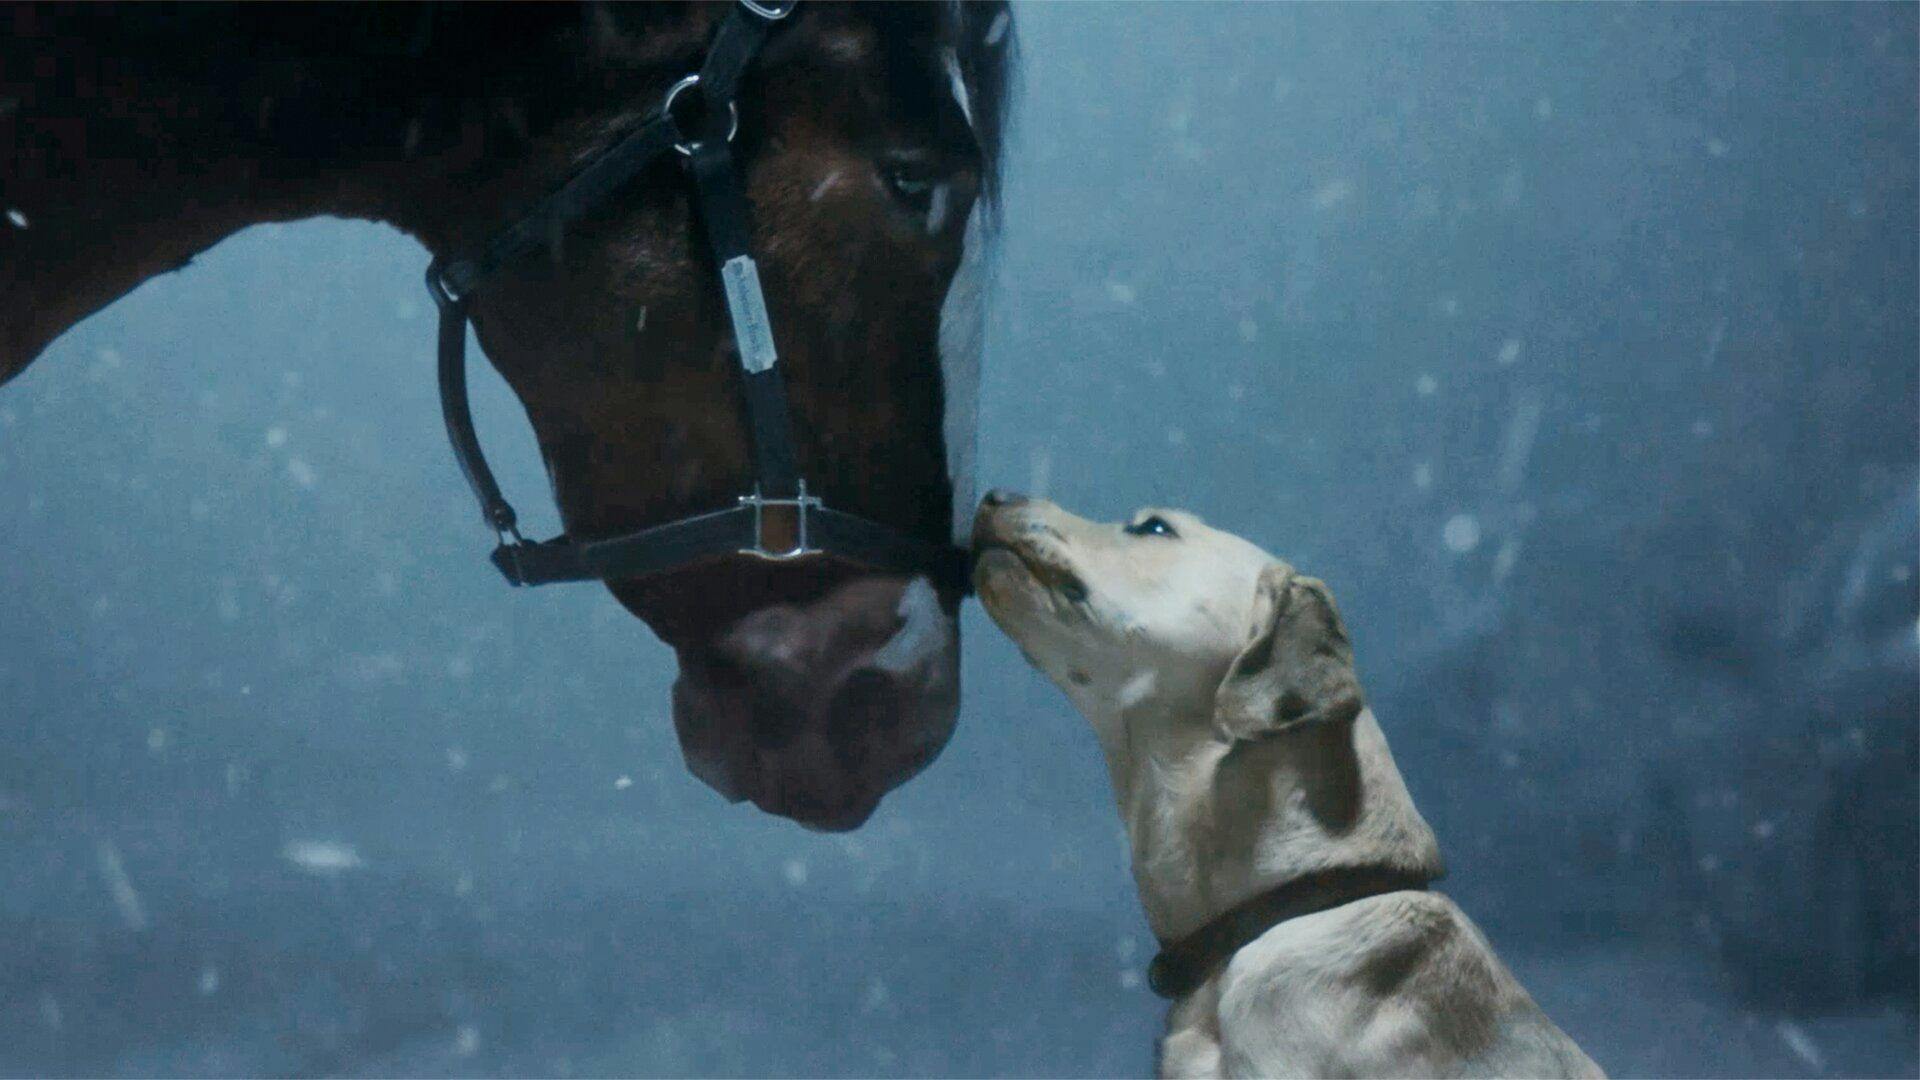 Dog licking horse in Budweiser Super Bowl ad